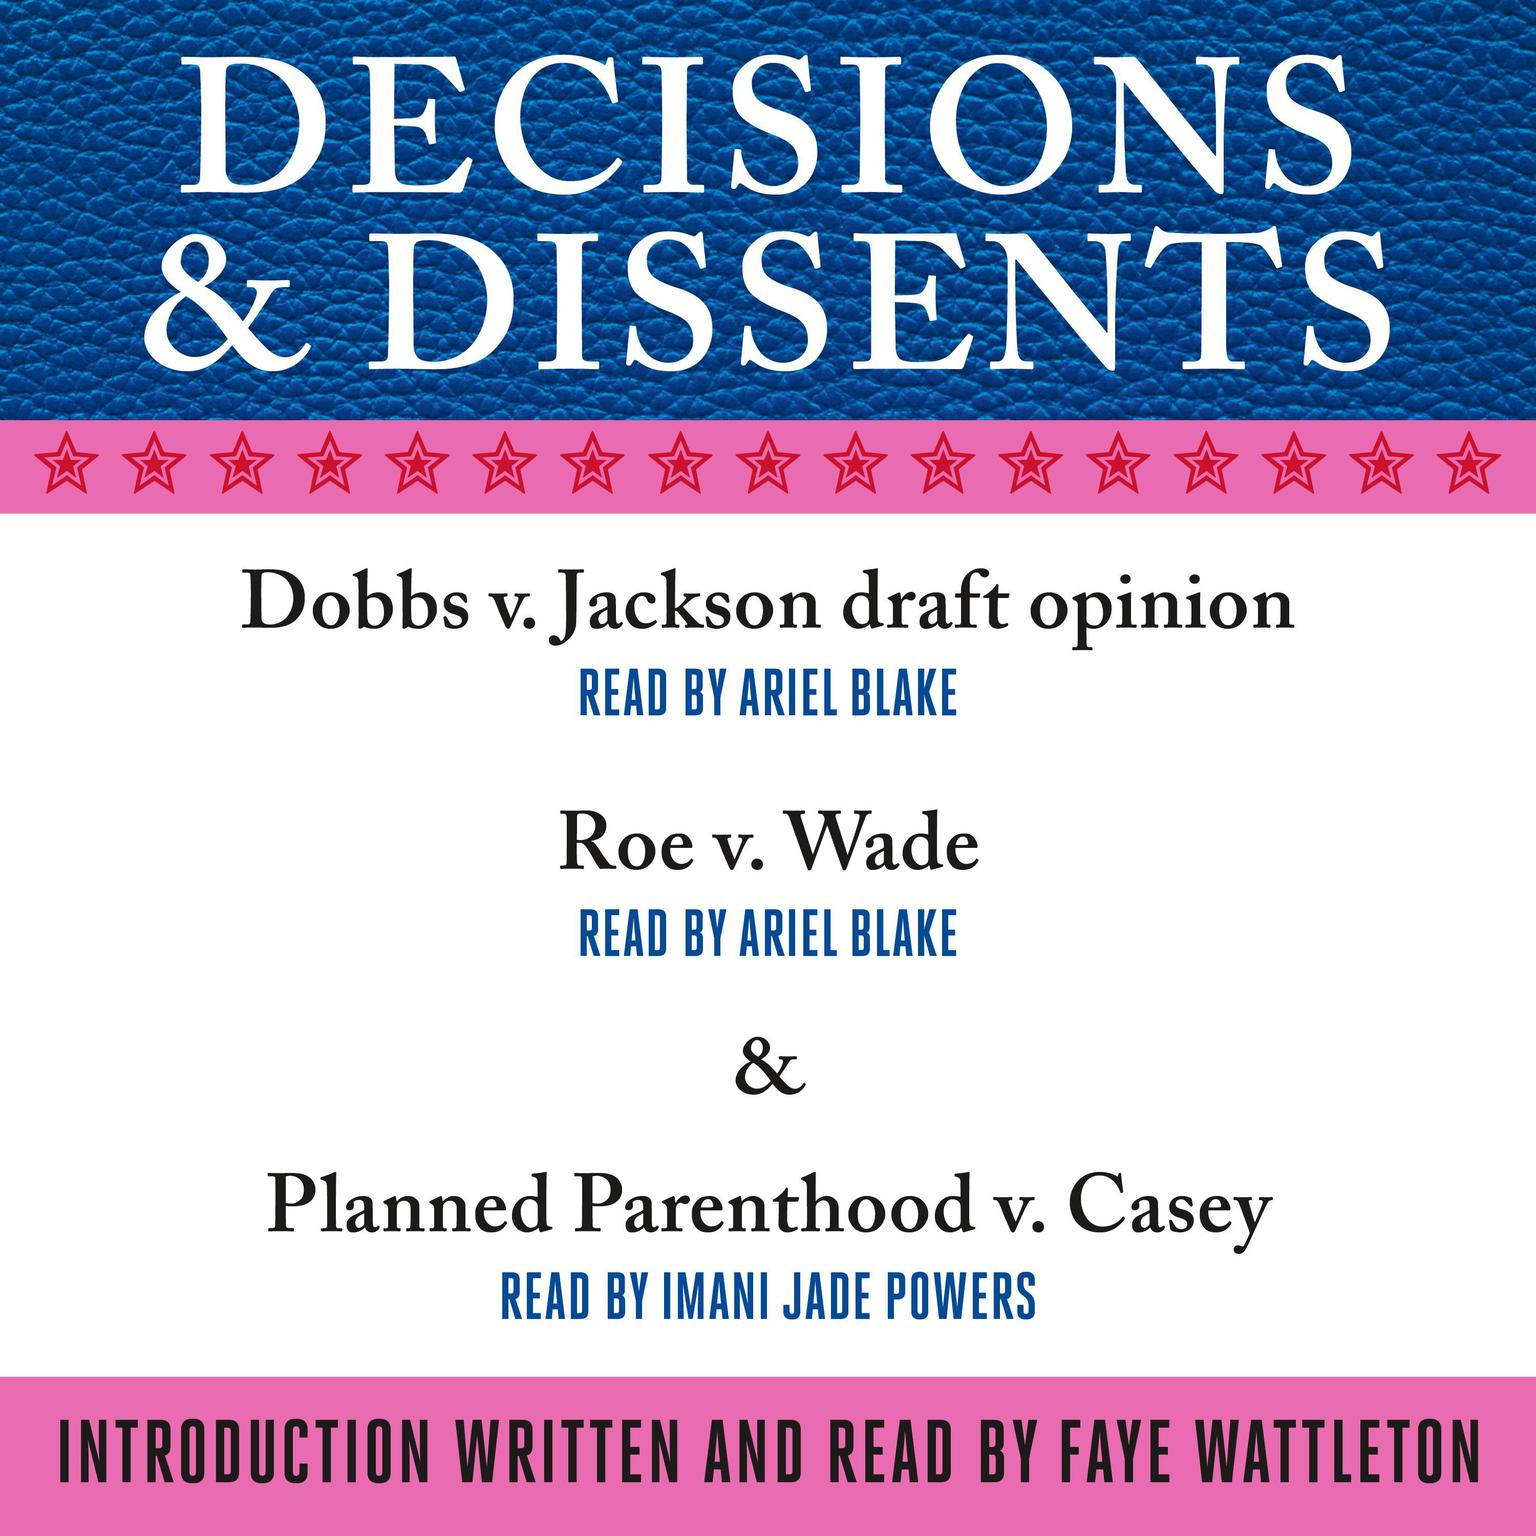 Decisions & Dissents: The Dobbs v. Jackson Draft Opinion, Roe v. Wade, and Planned Parenthood v. Casey Opinions Audiobook, by The Supreme Court of the United States